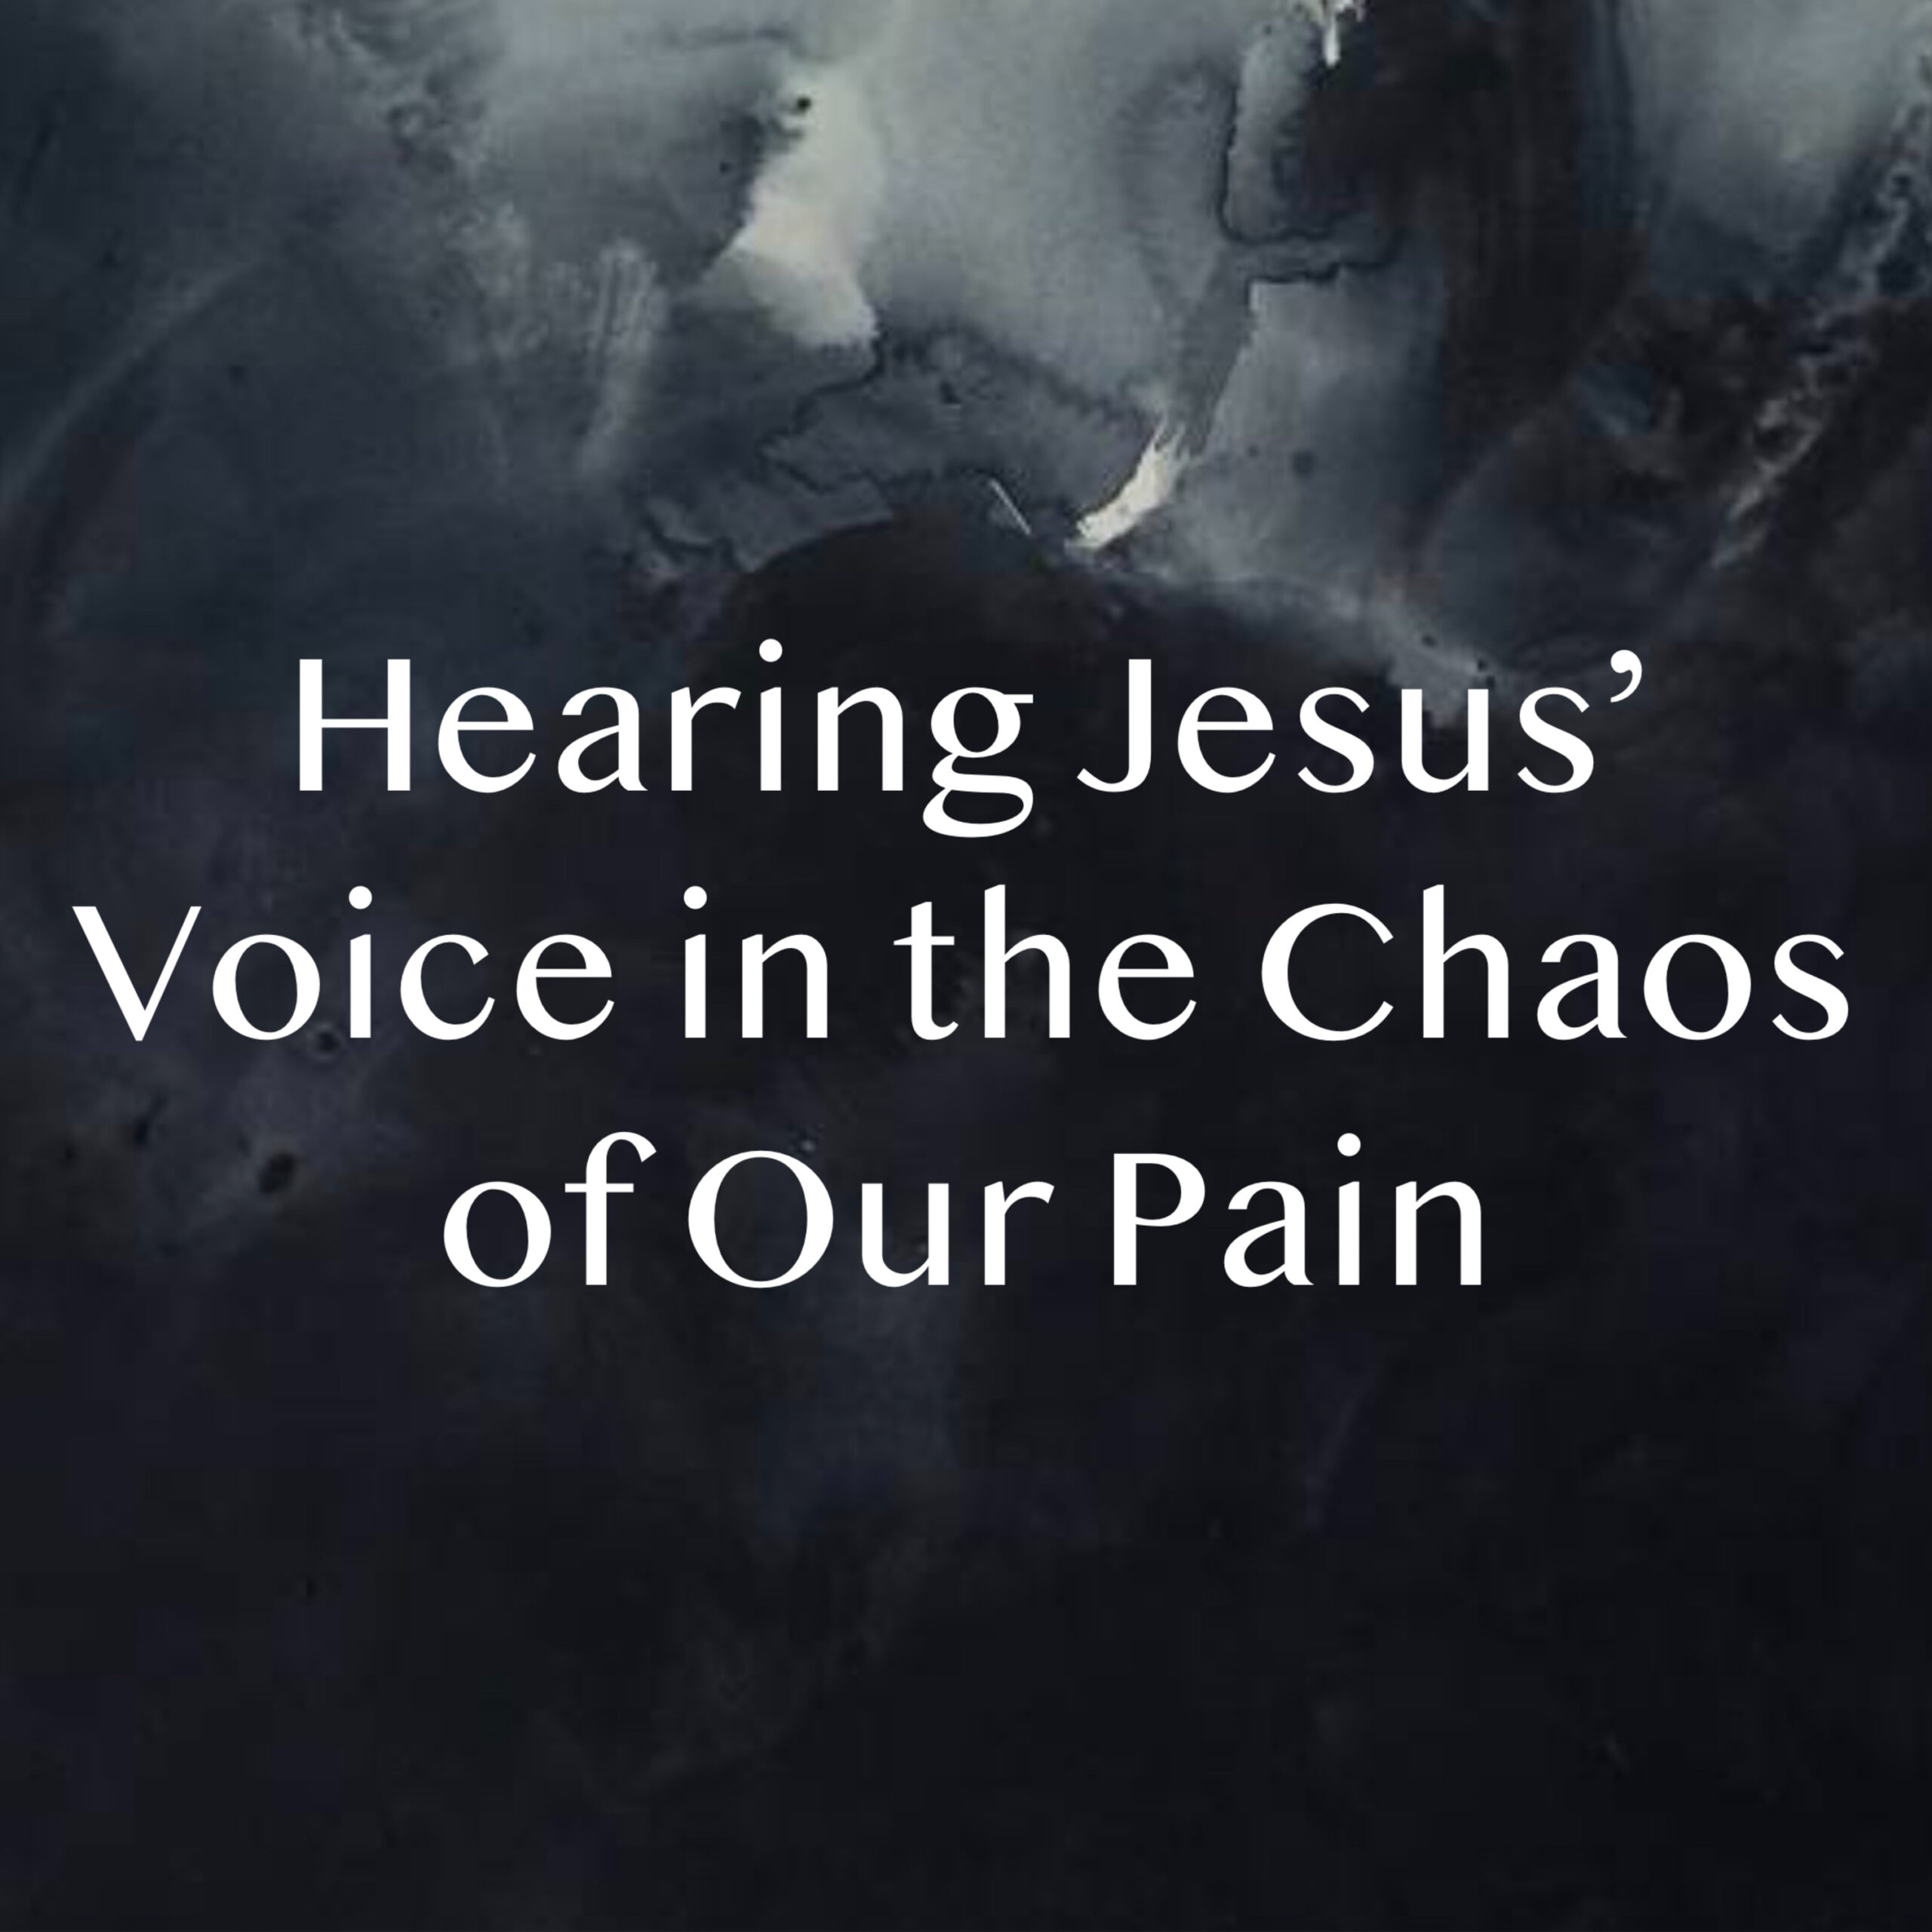 Hearing Jesus' Voice in the Chaos of Our Pain